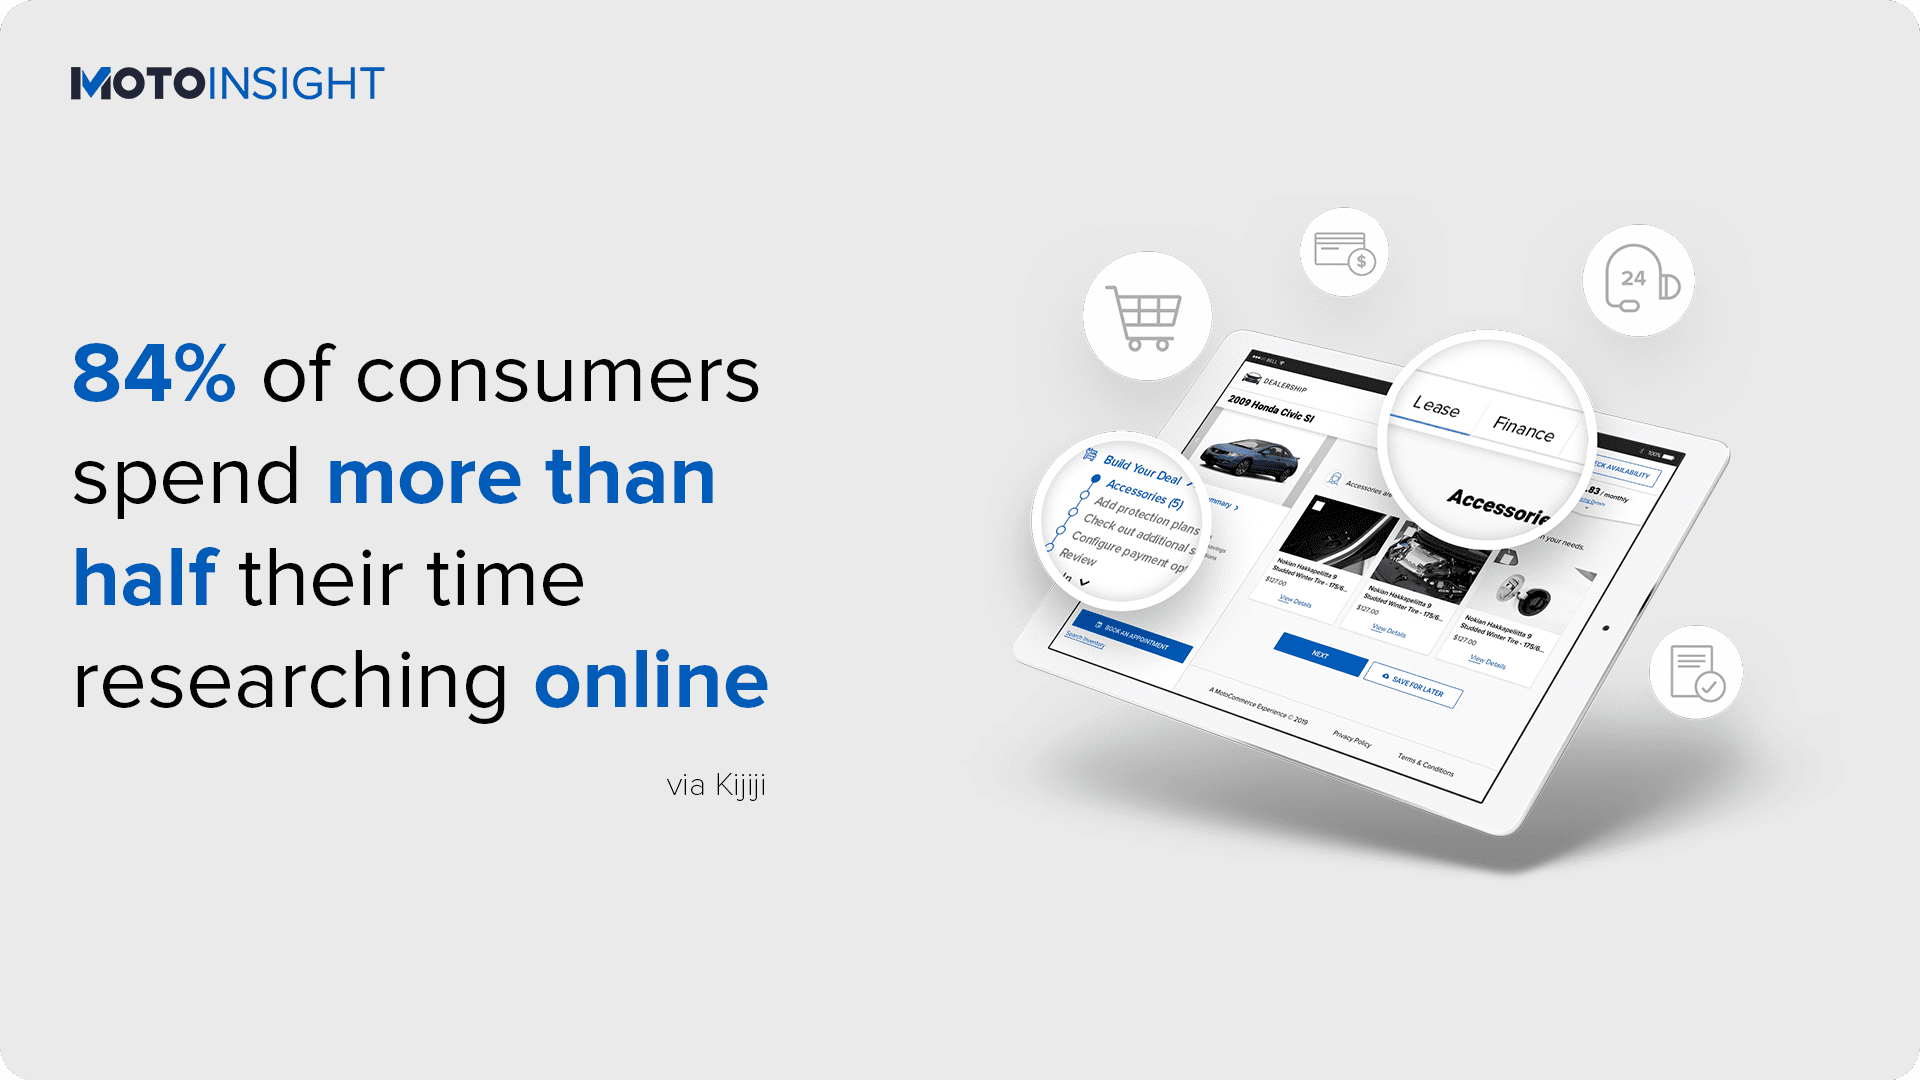 84% of consumers spend more than half their time researching online kijiji